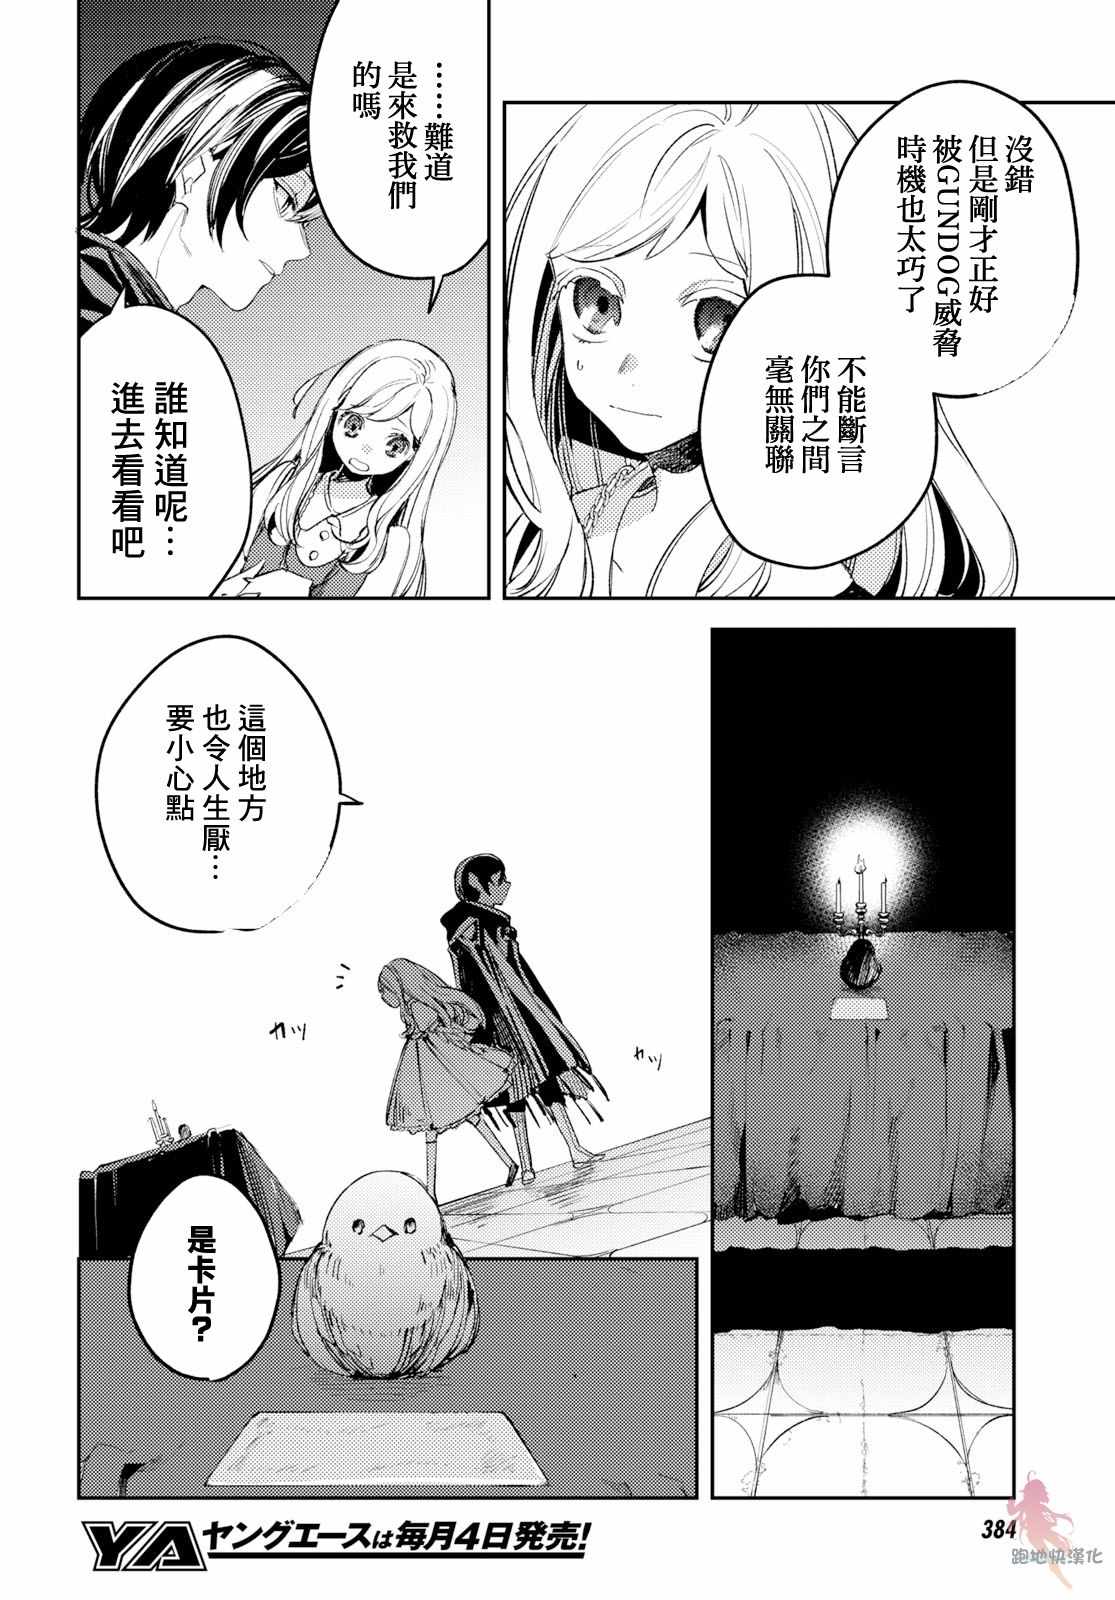 《angelic syndrome》漫画 004集